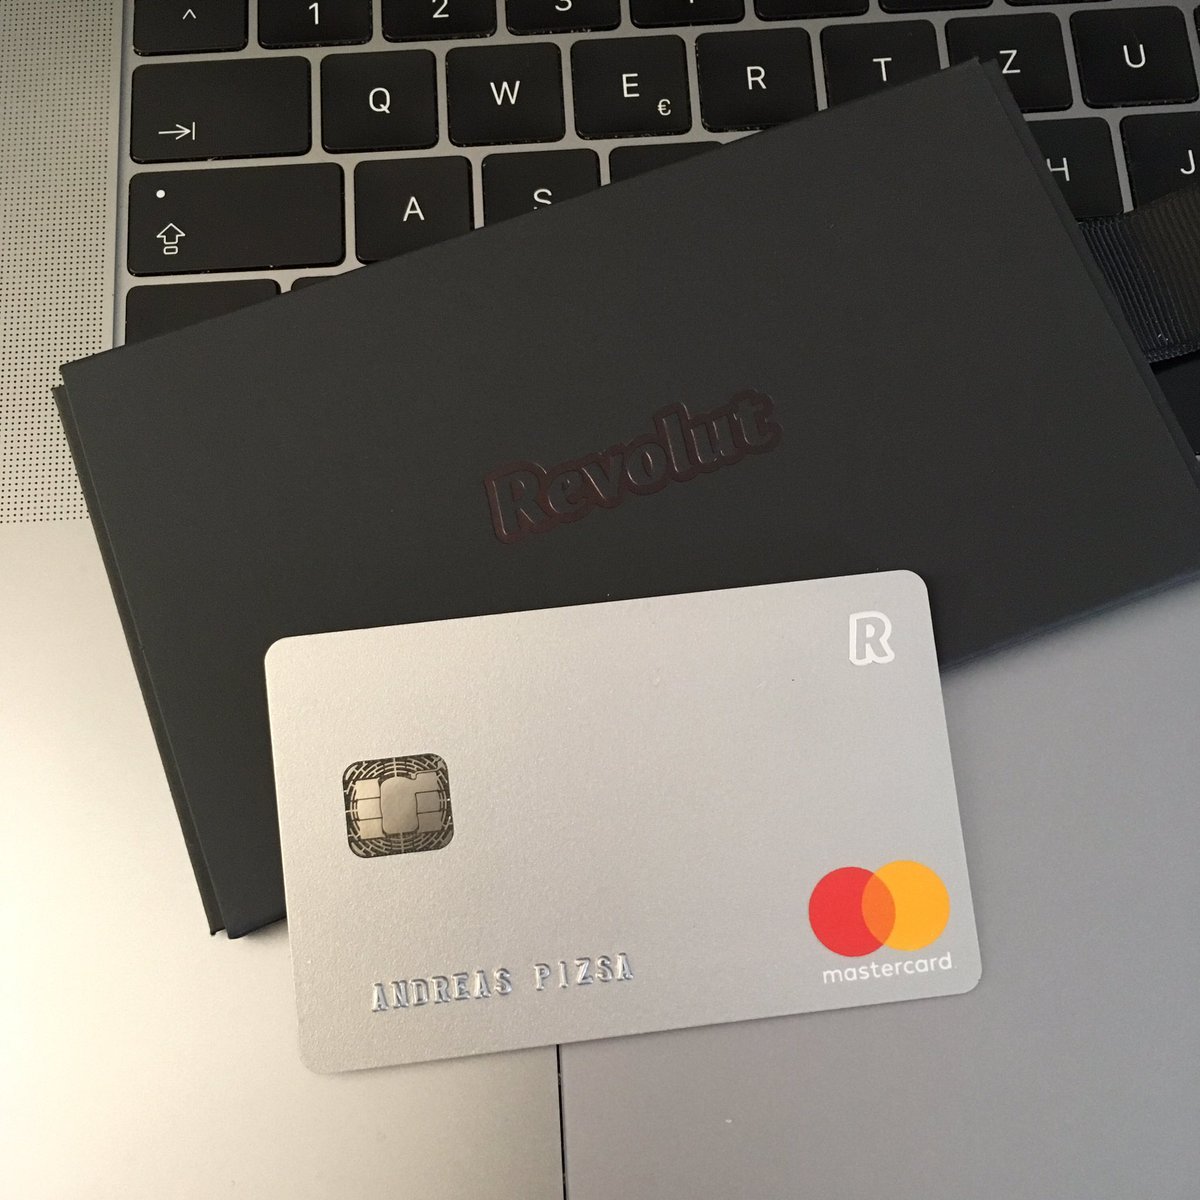 Andreas Pizsa on Twitter: "1 day between signup and card - great job,  @RevolutApp ! 📱📦💳👌🏻 #banking #unpacking #ux… "